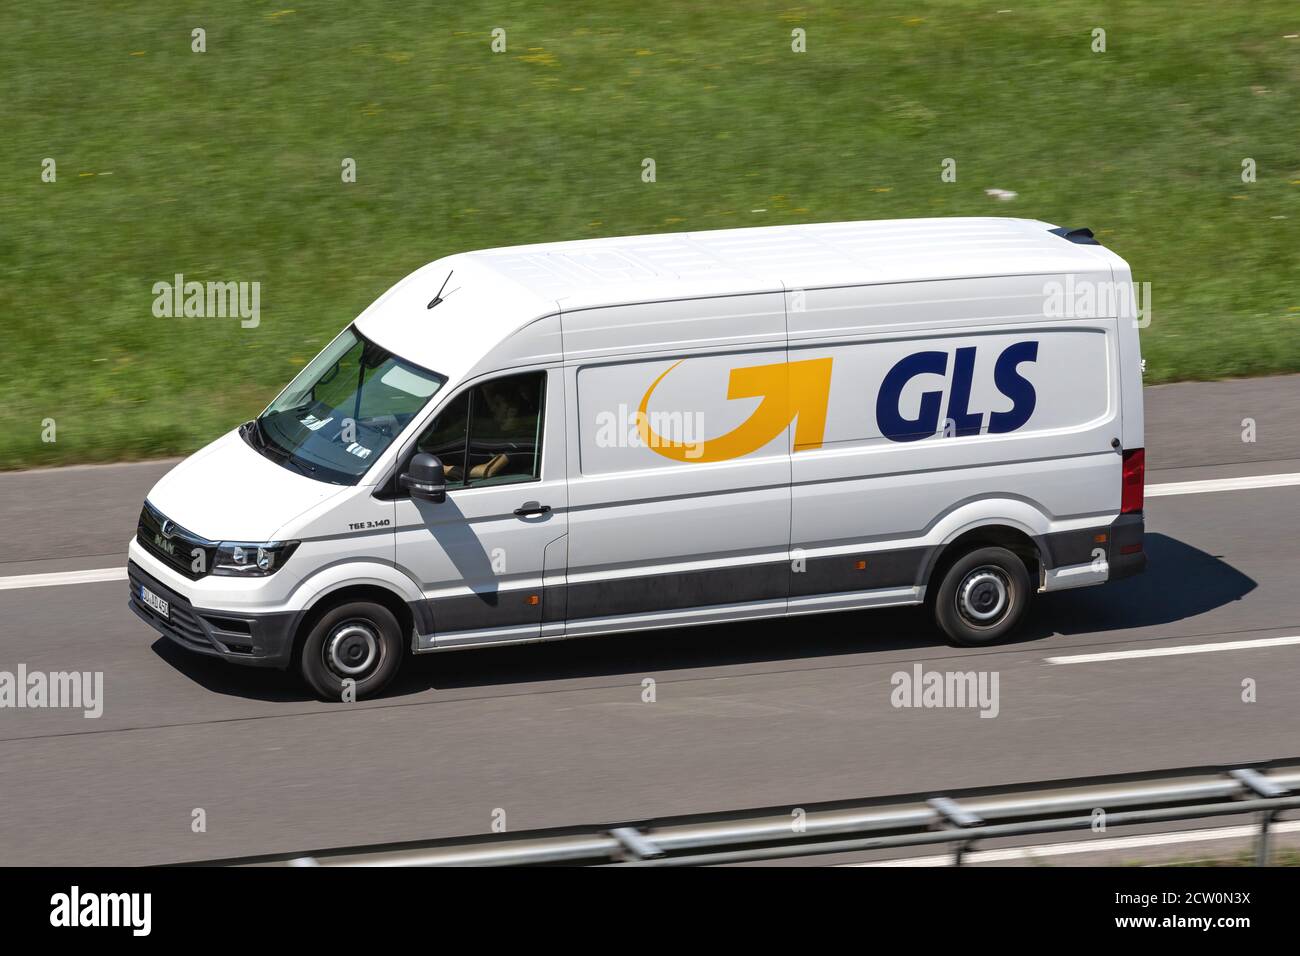 GLS MAN TGE delivery van on motorway. General Logistics Systems B.V. was founded in 1999 and is a subsidiary of British postal service Royal Mail. Stock Photo